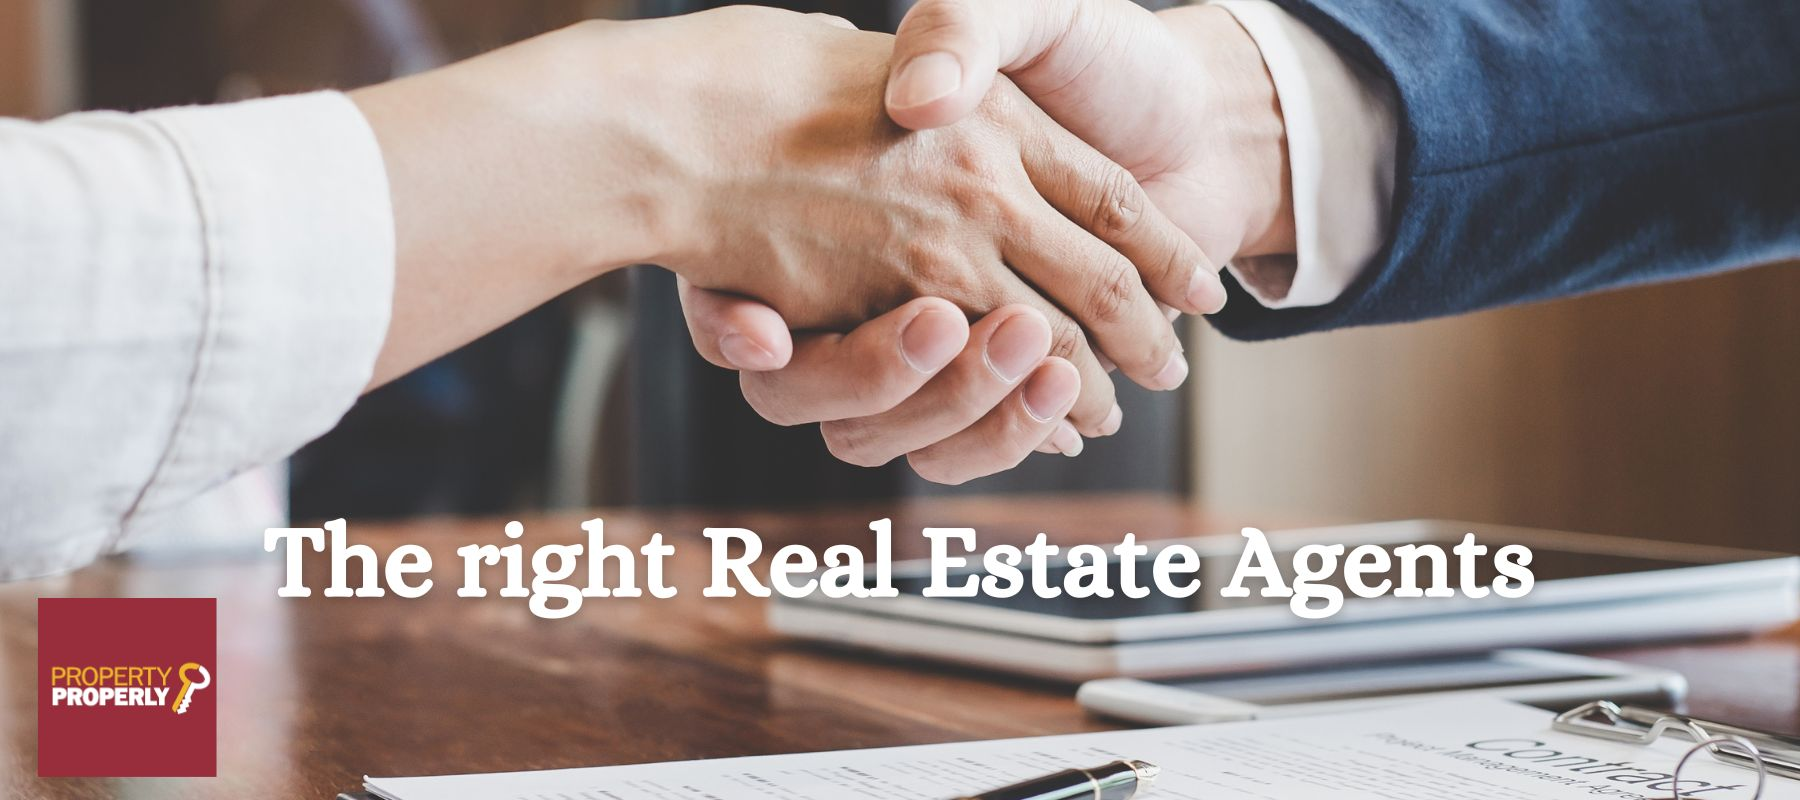 The right real estate agent